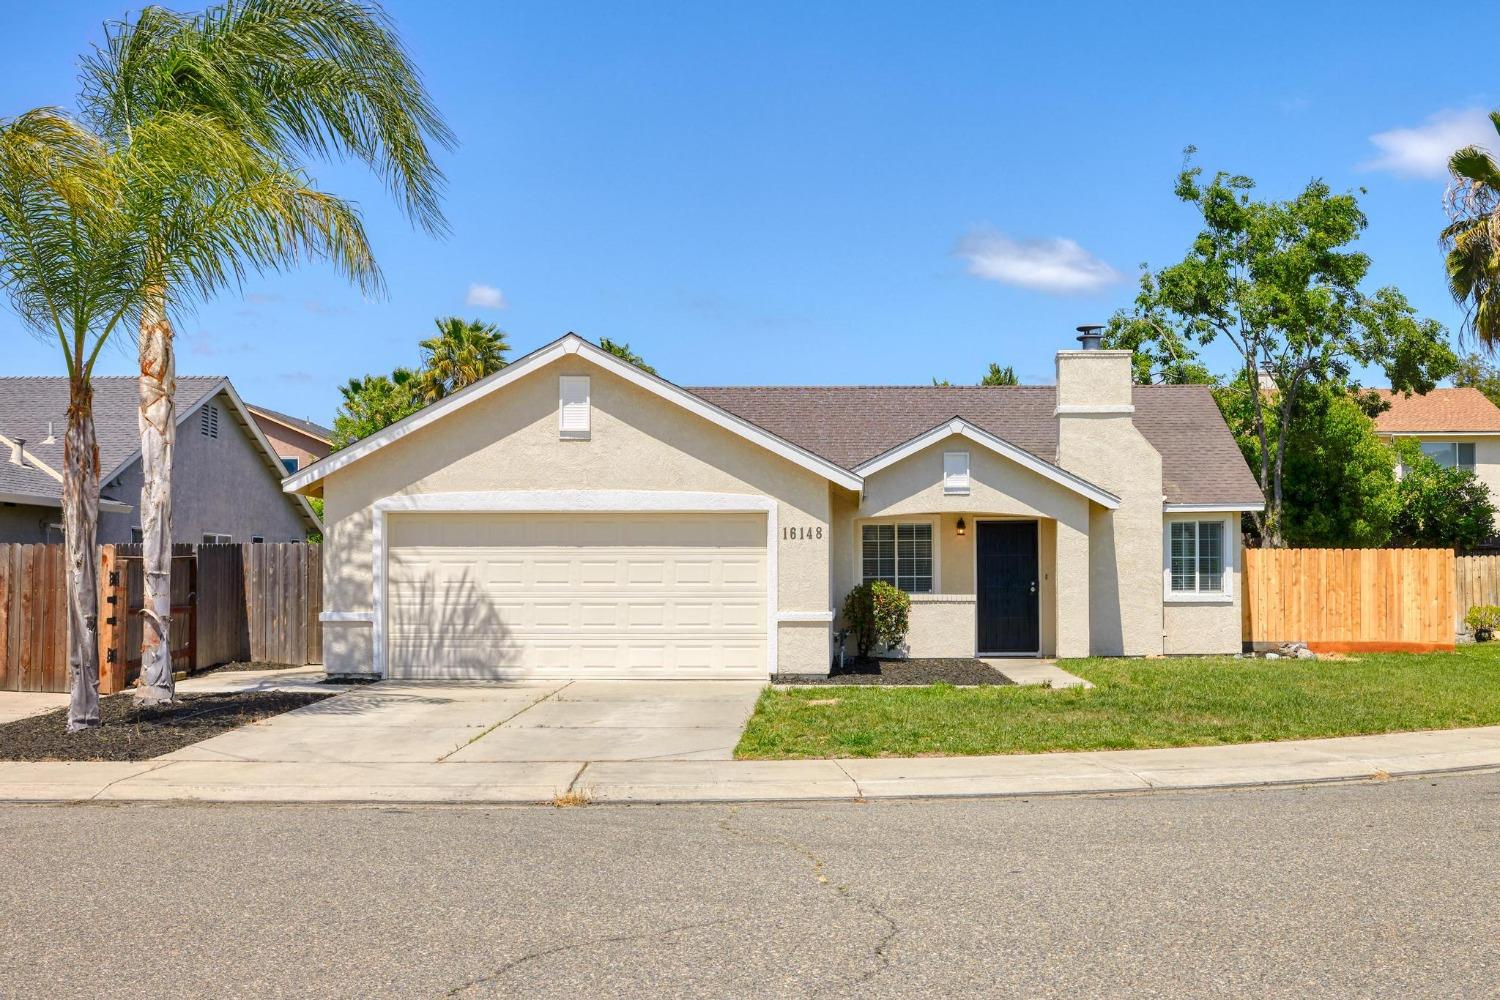 Welcome to tranquil living at 16148 Summit Ct. Nestled in a cul-de-sac, this 3-bed, 2-bath home offe